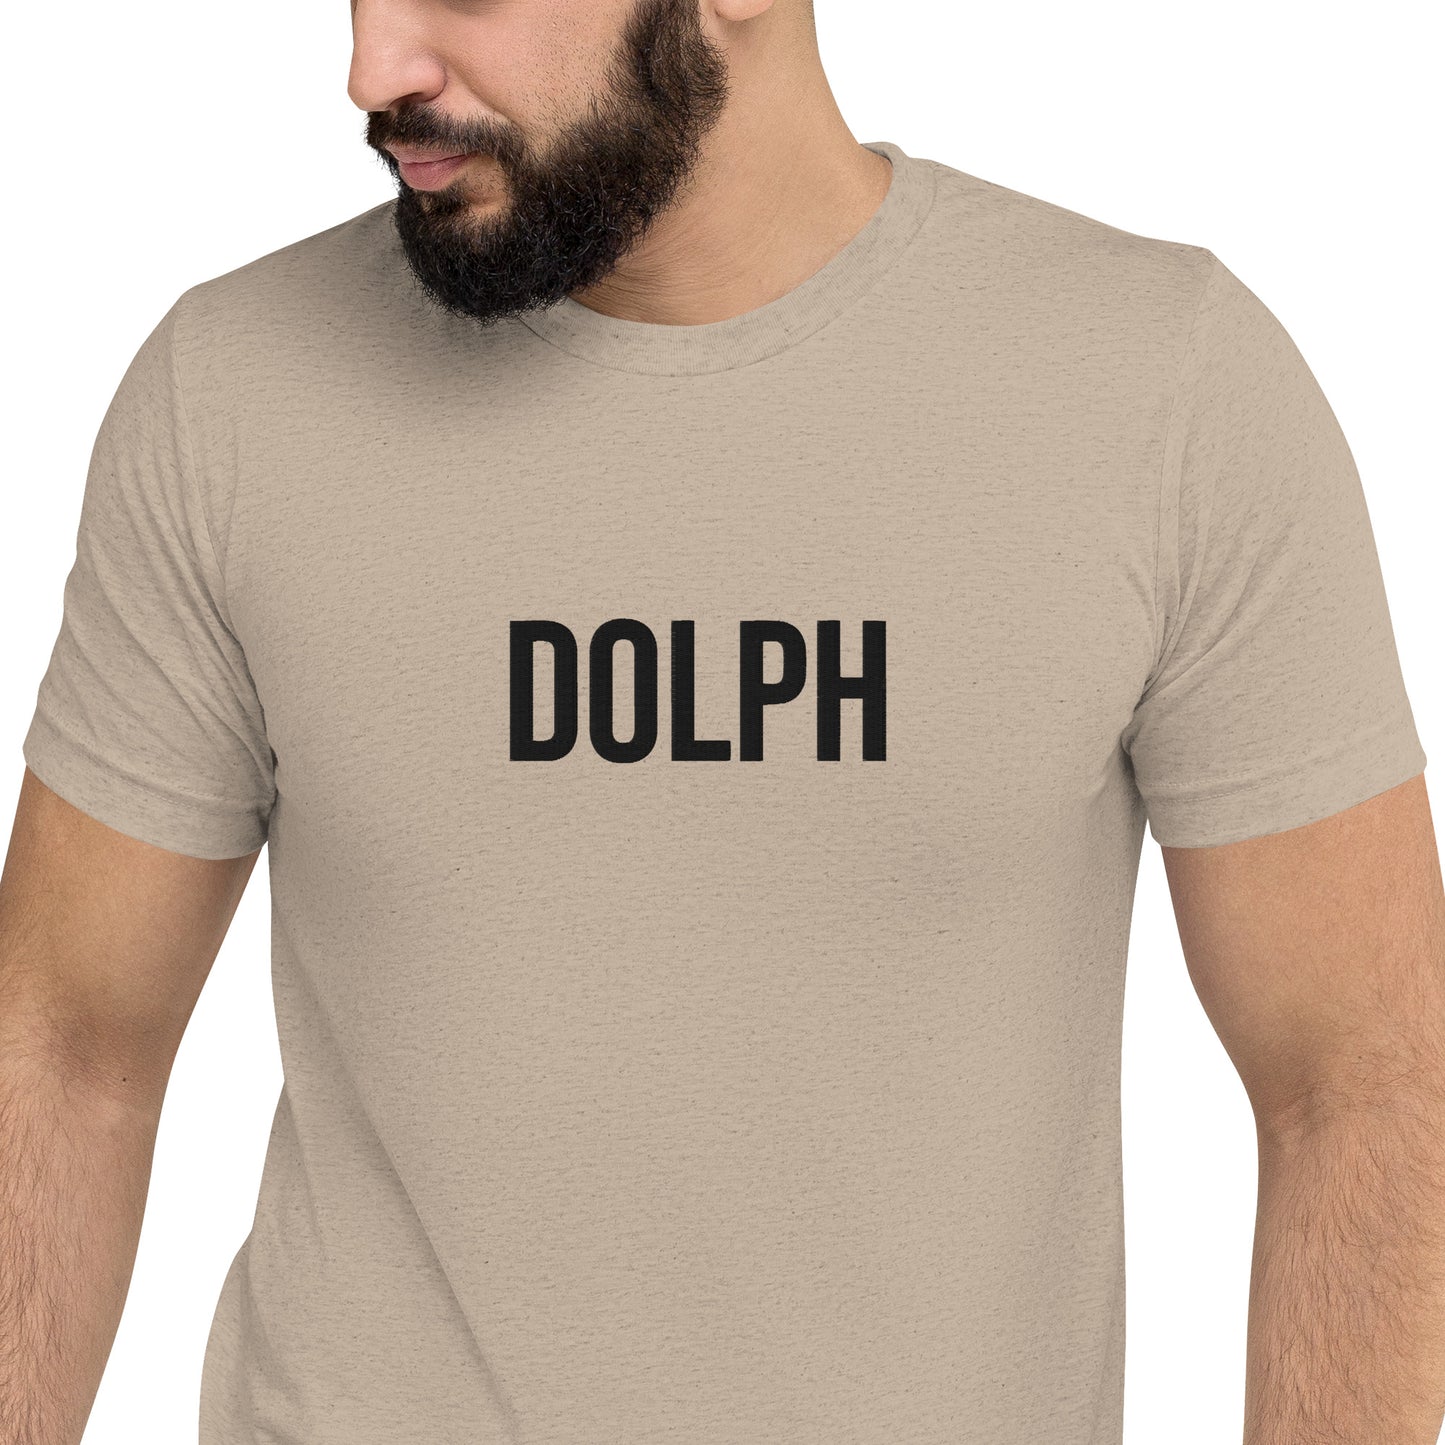 Dolph Embroidered Unisex T-Shirt